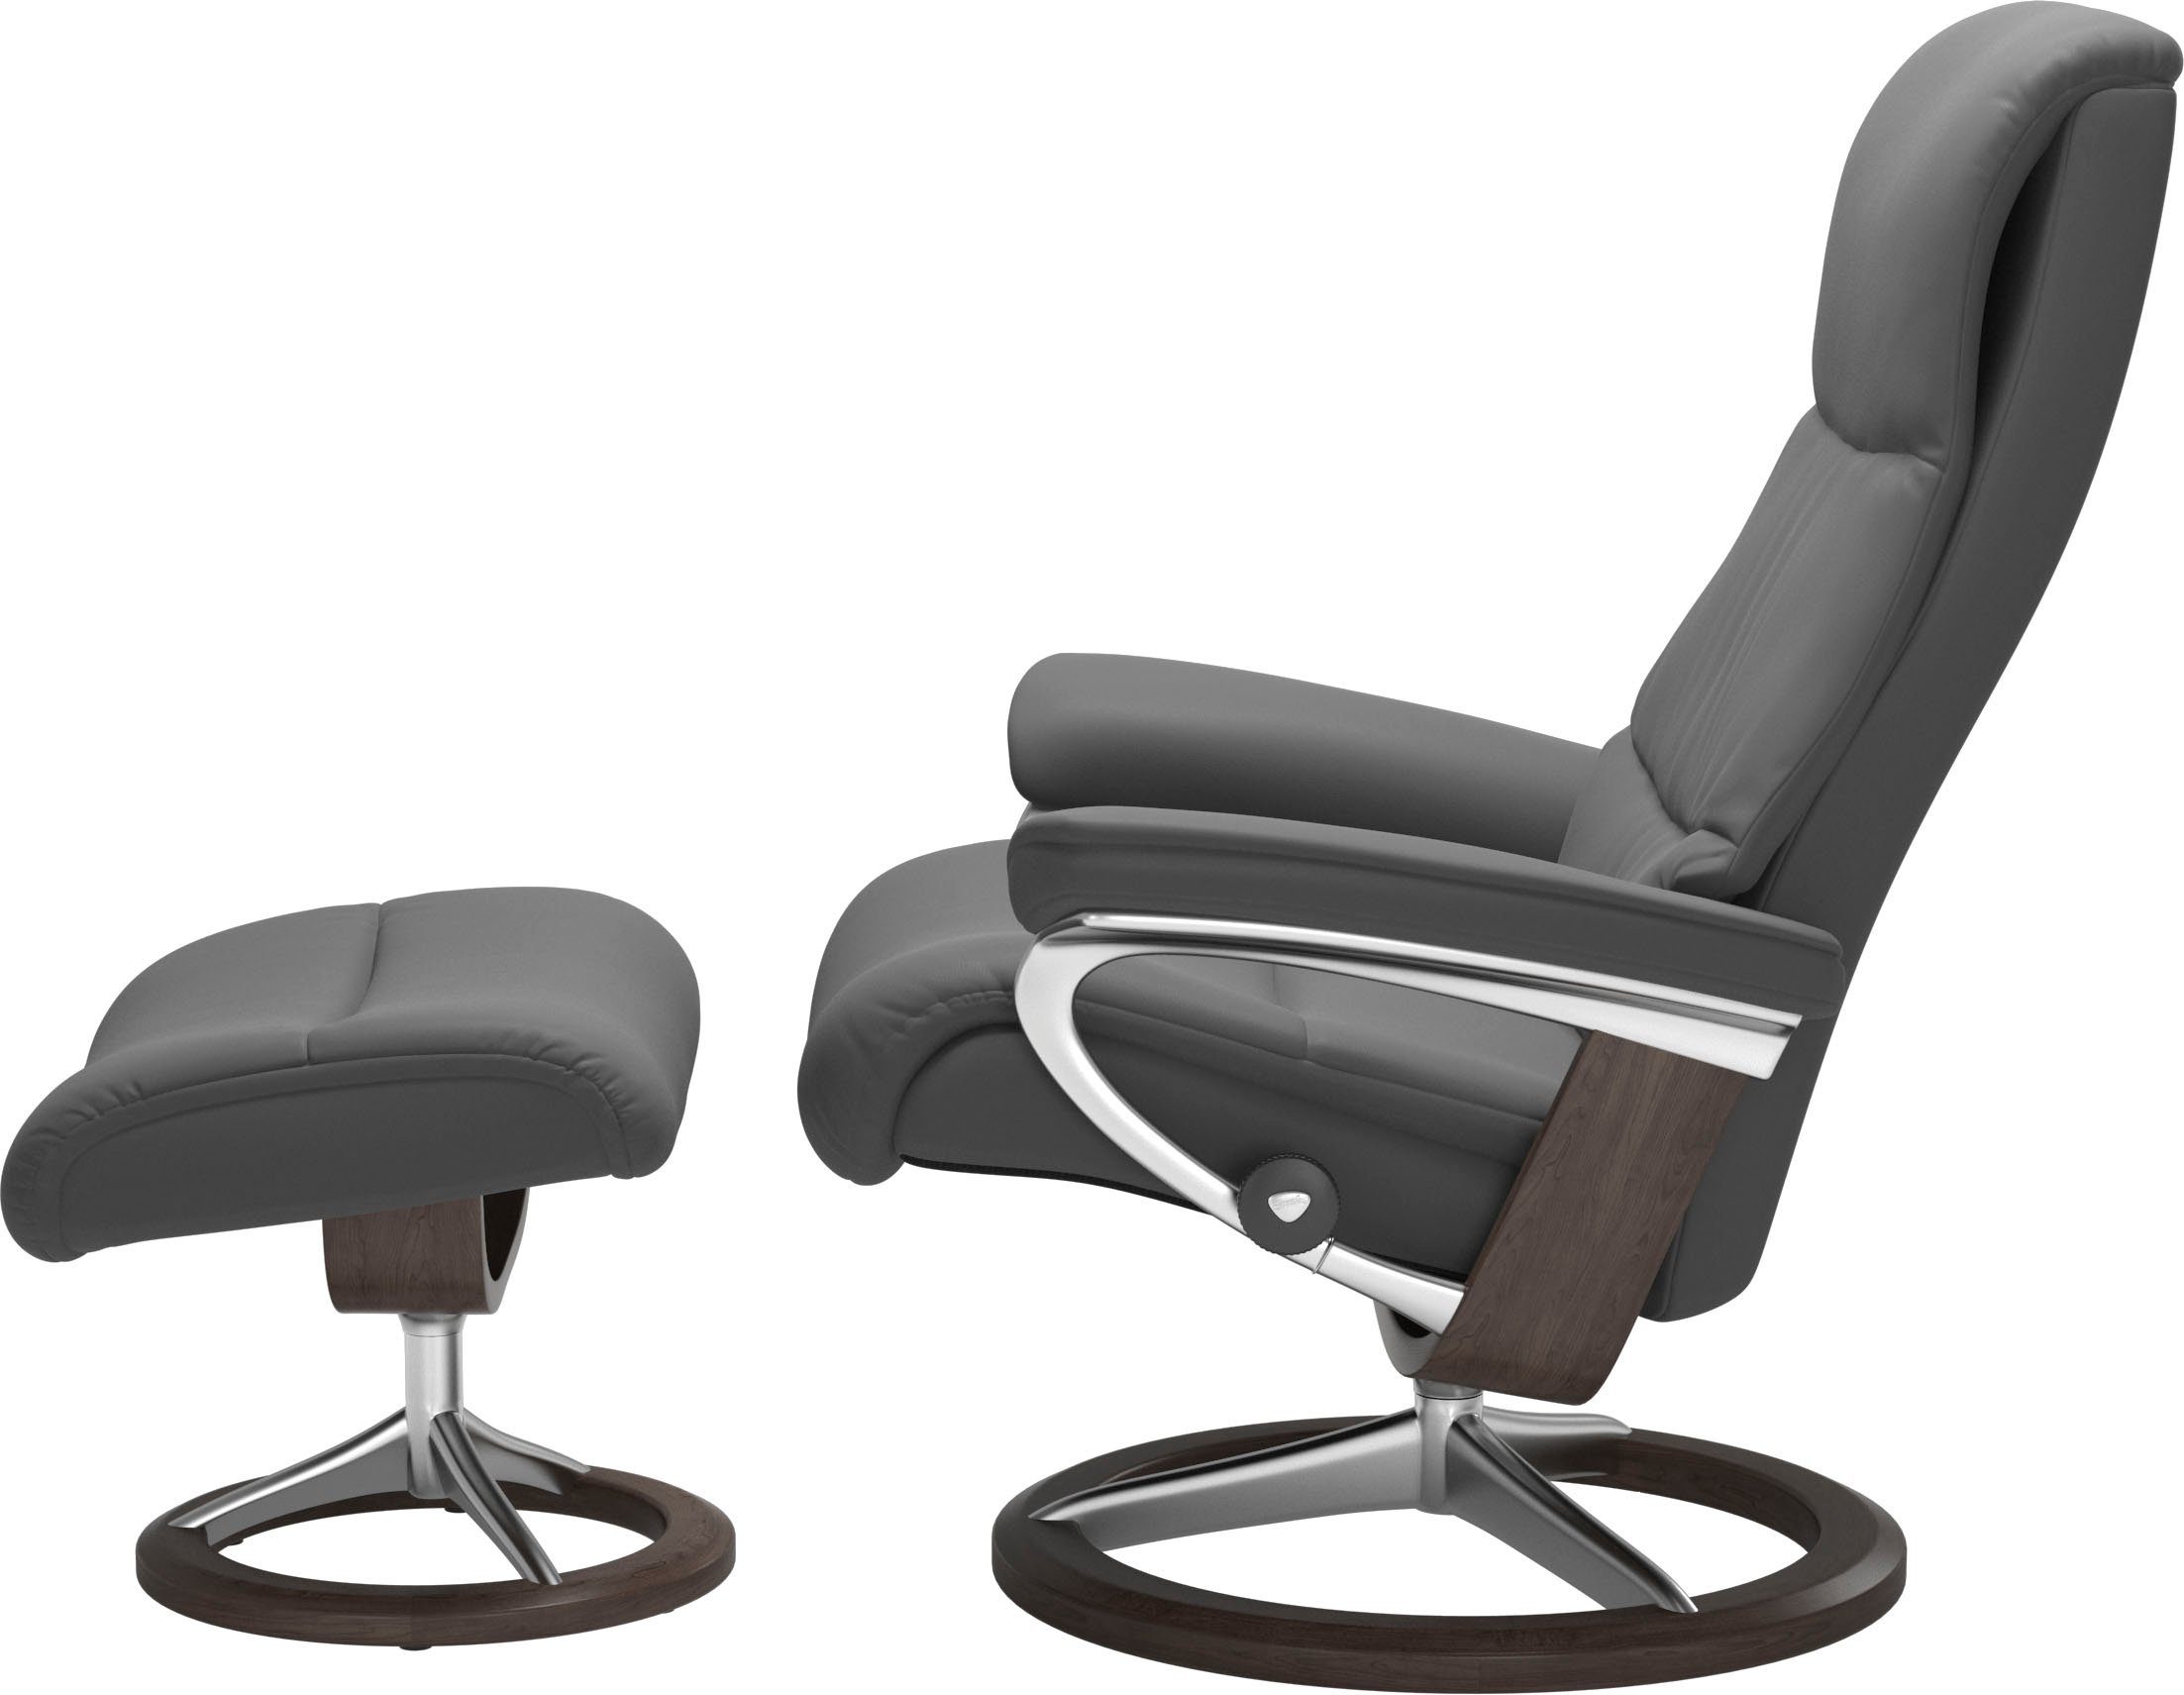 mit Base, Größe S,Gestell View, Signature Relaxsessel Wenge Stressless®